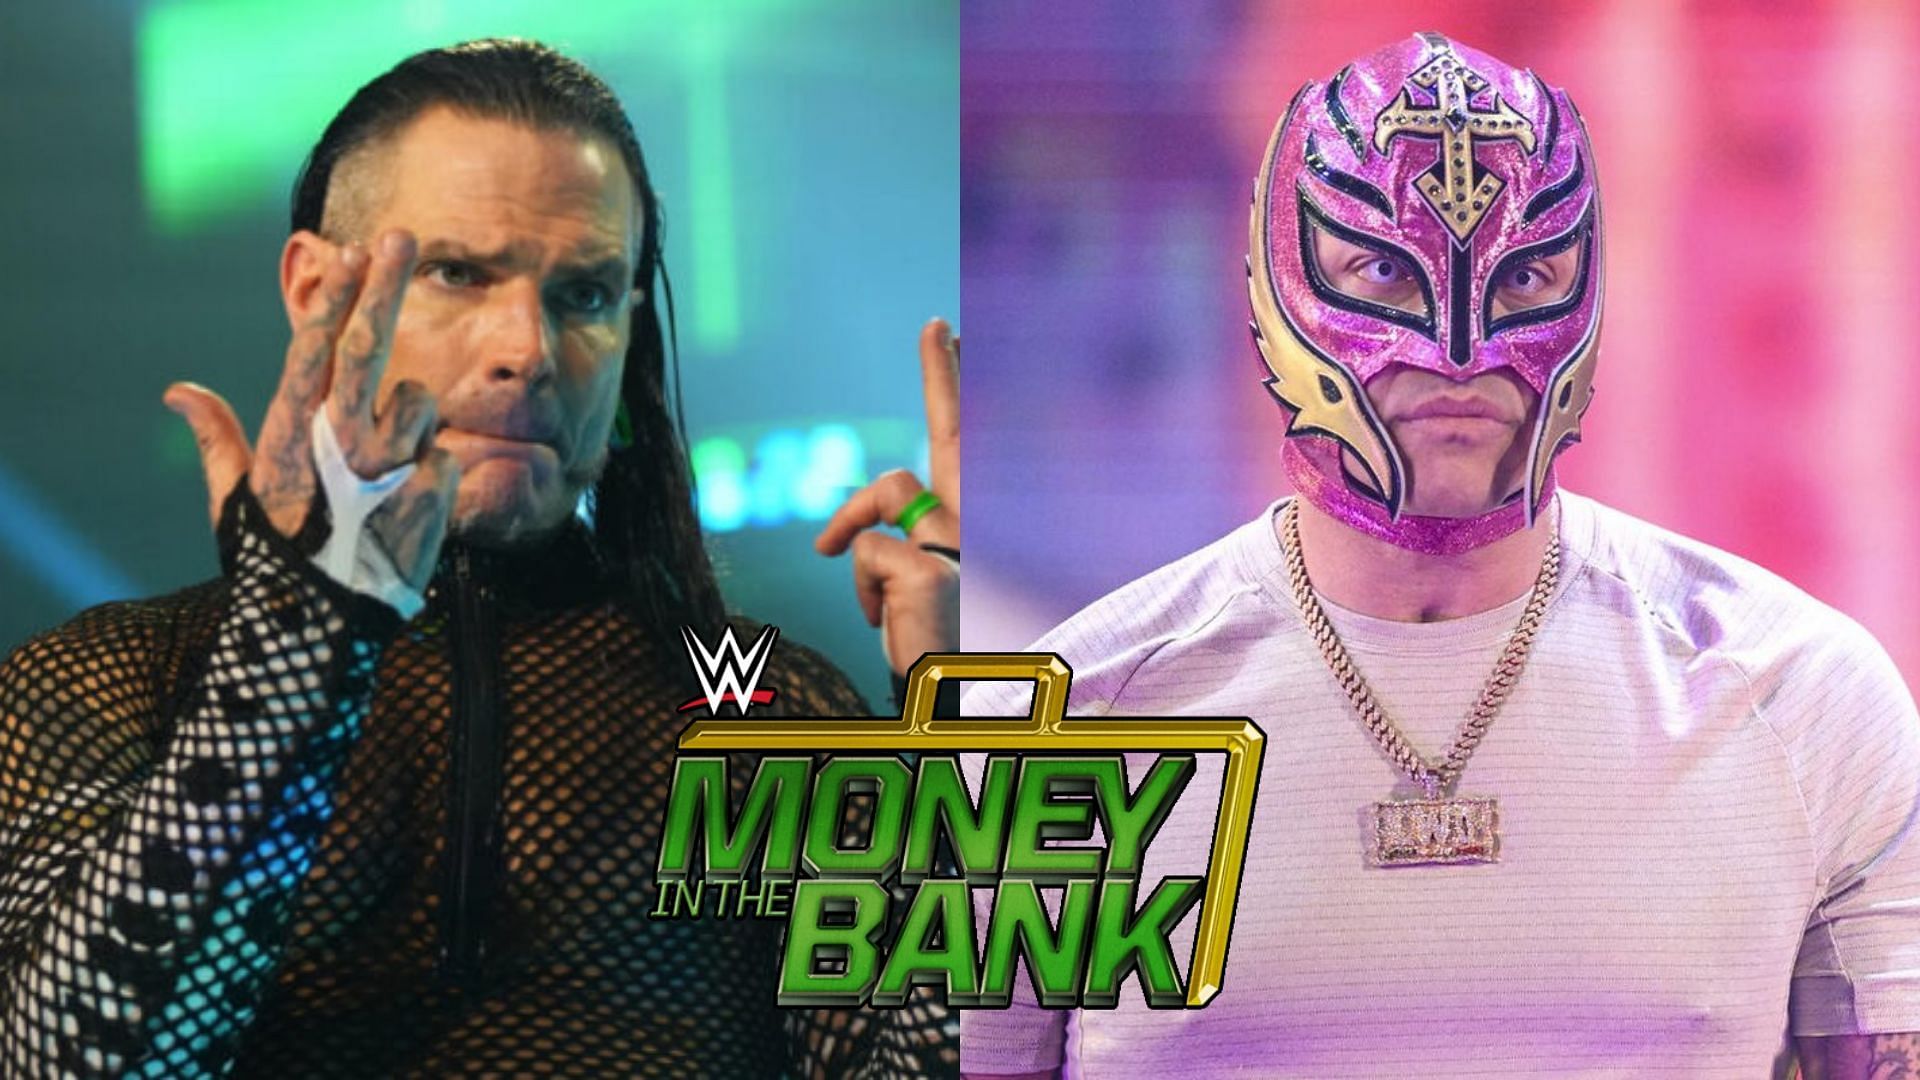 Jeff Hardy (left) and Rey Mysterio (right) are previous Money in the Bank ladder match participants.